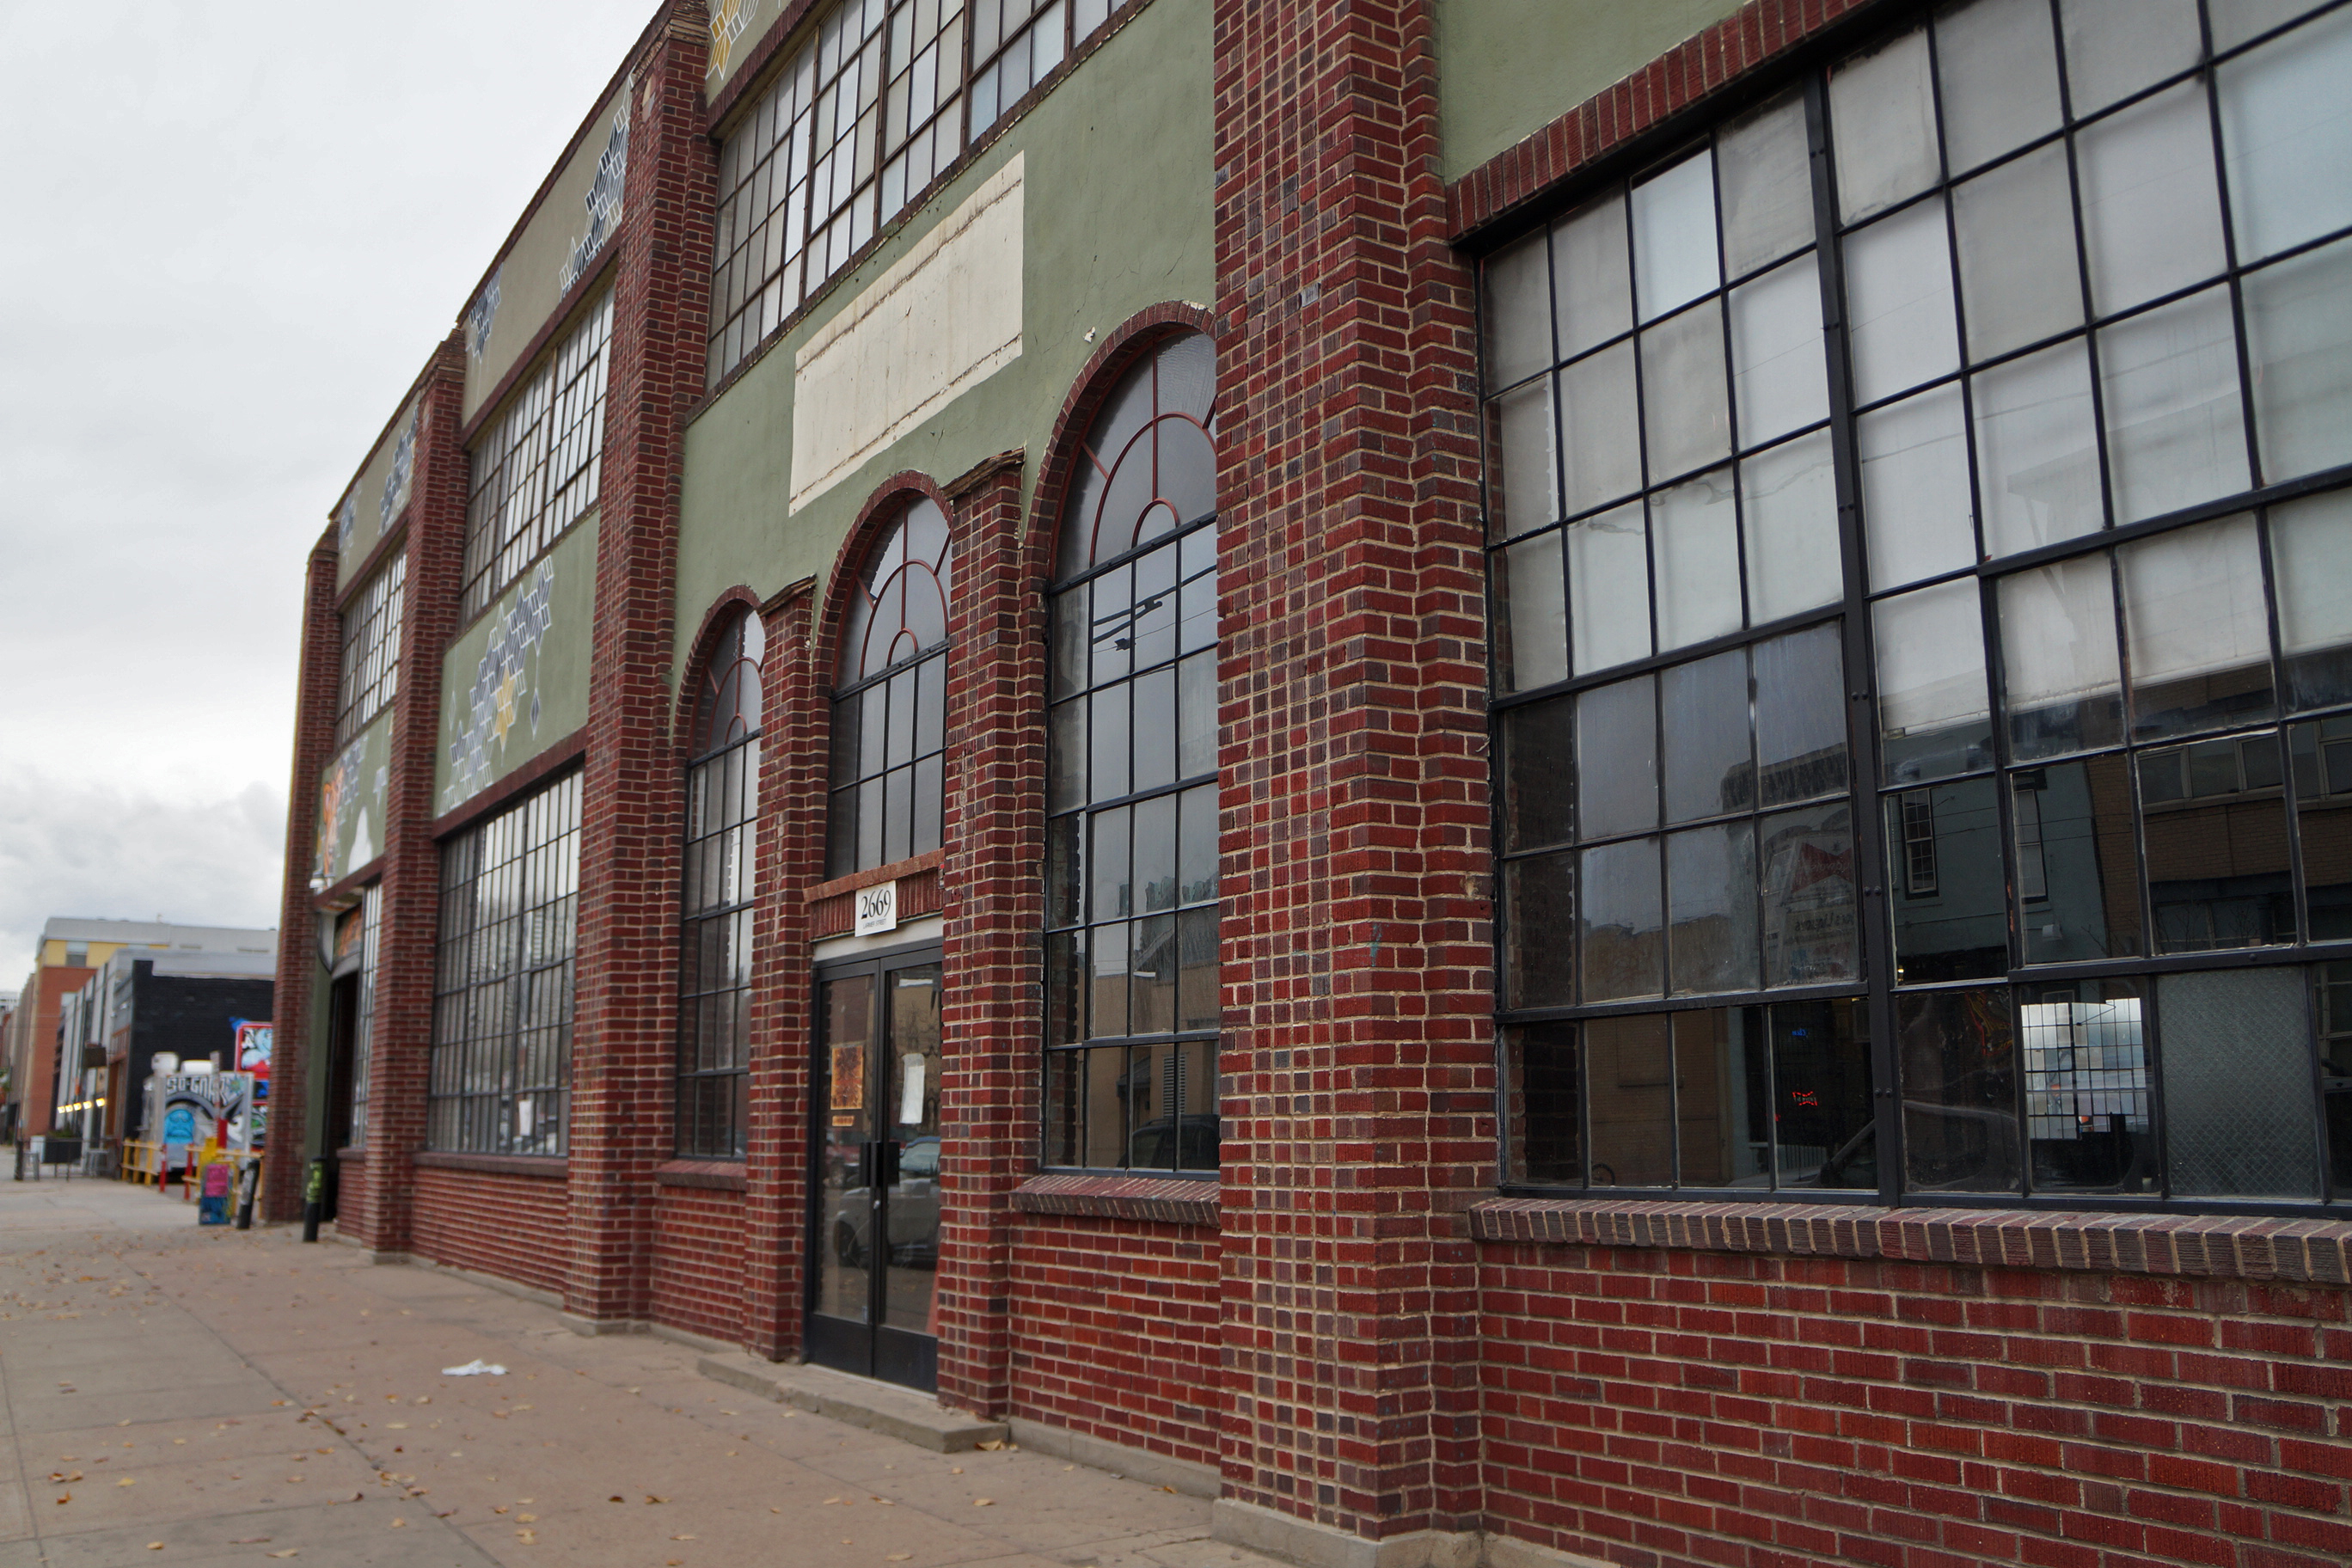 Central Market will fill in an old warehouse space on Larimer Street. Photos by Amy DiPierro.